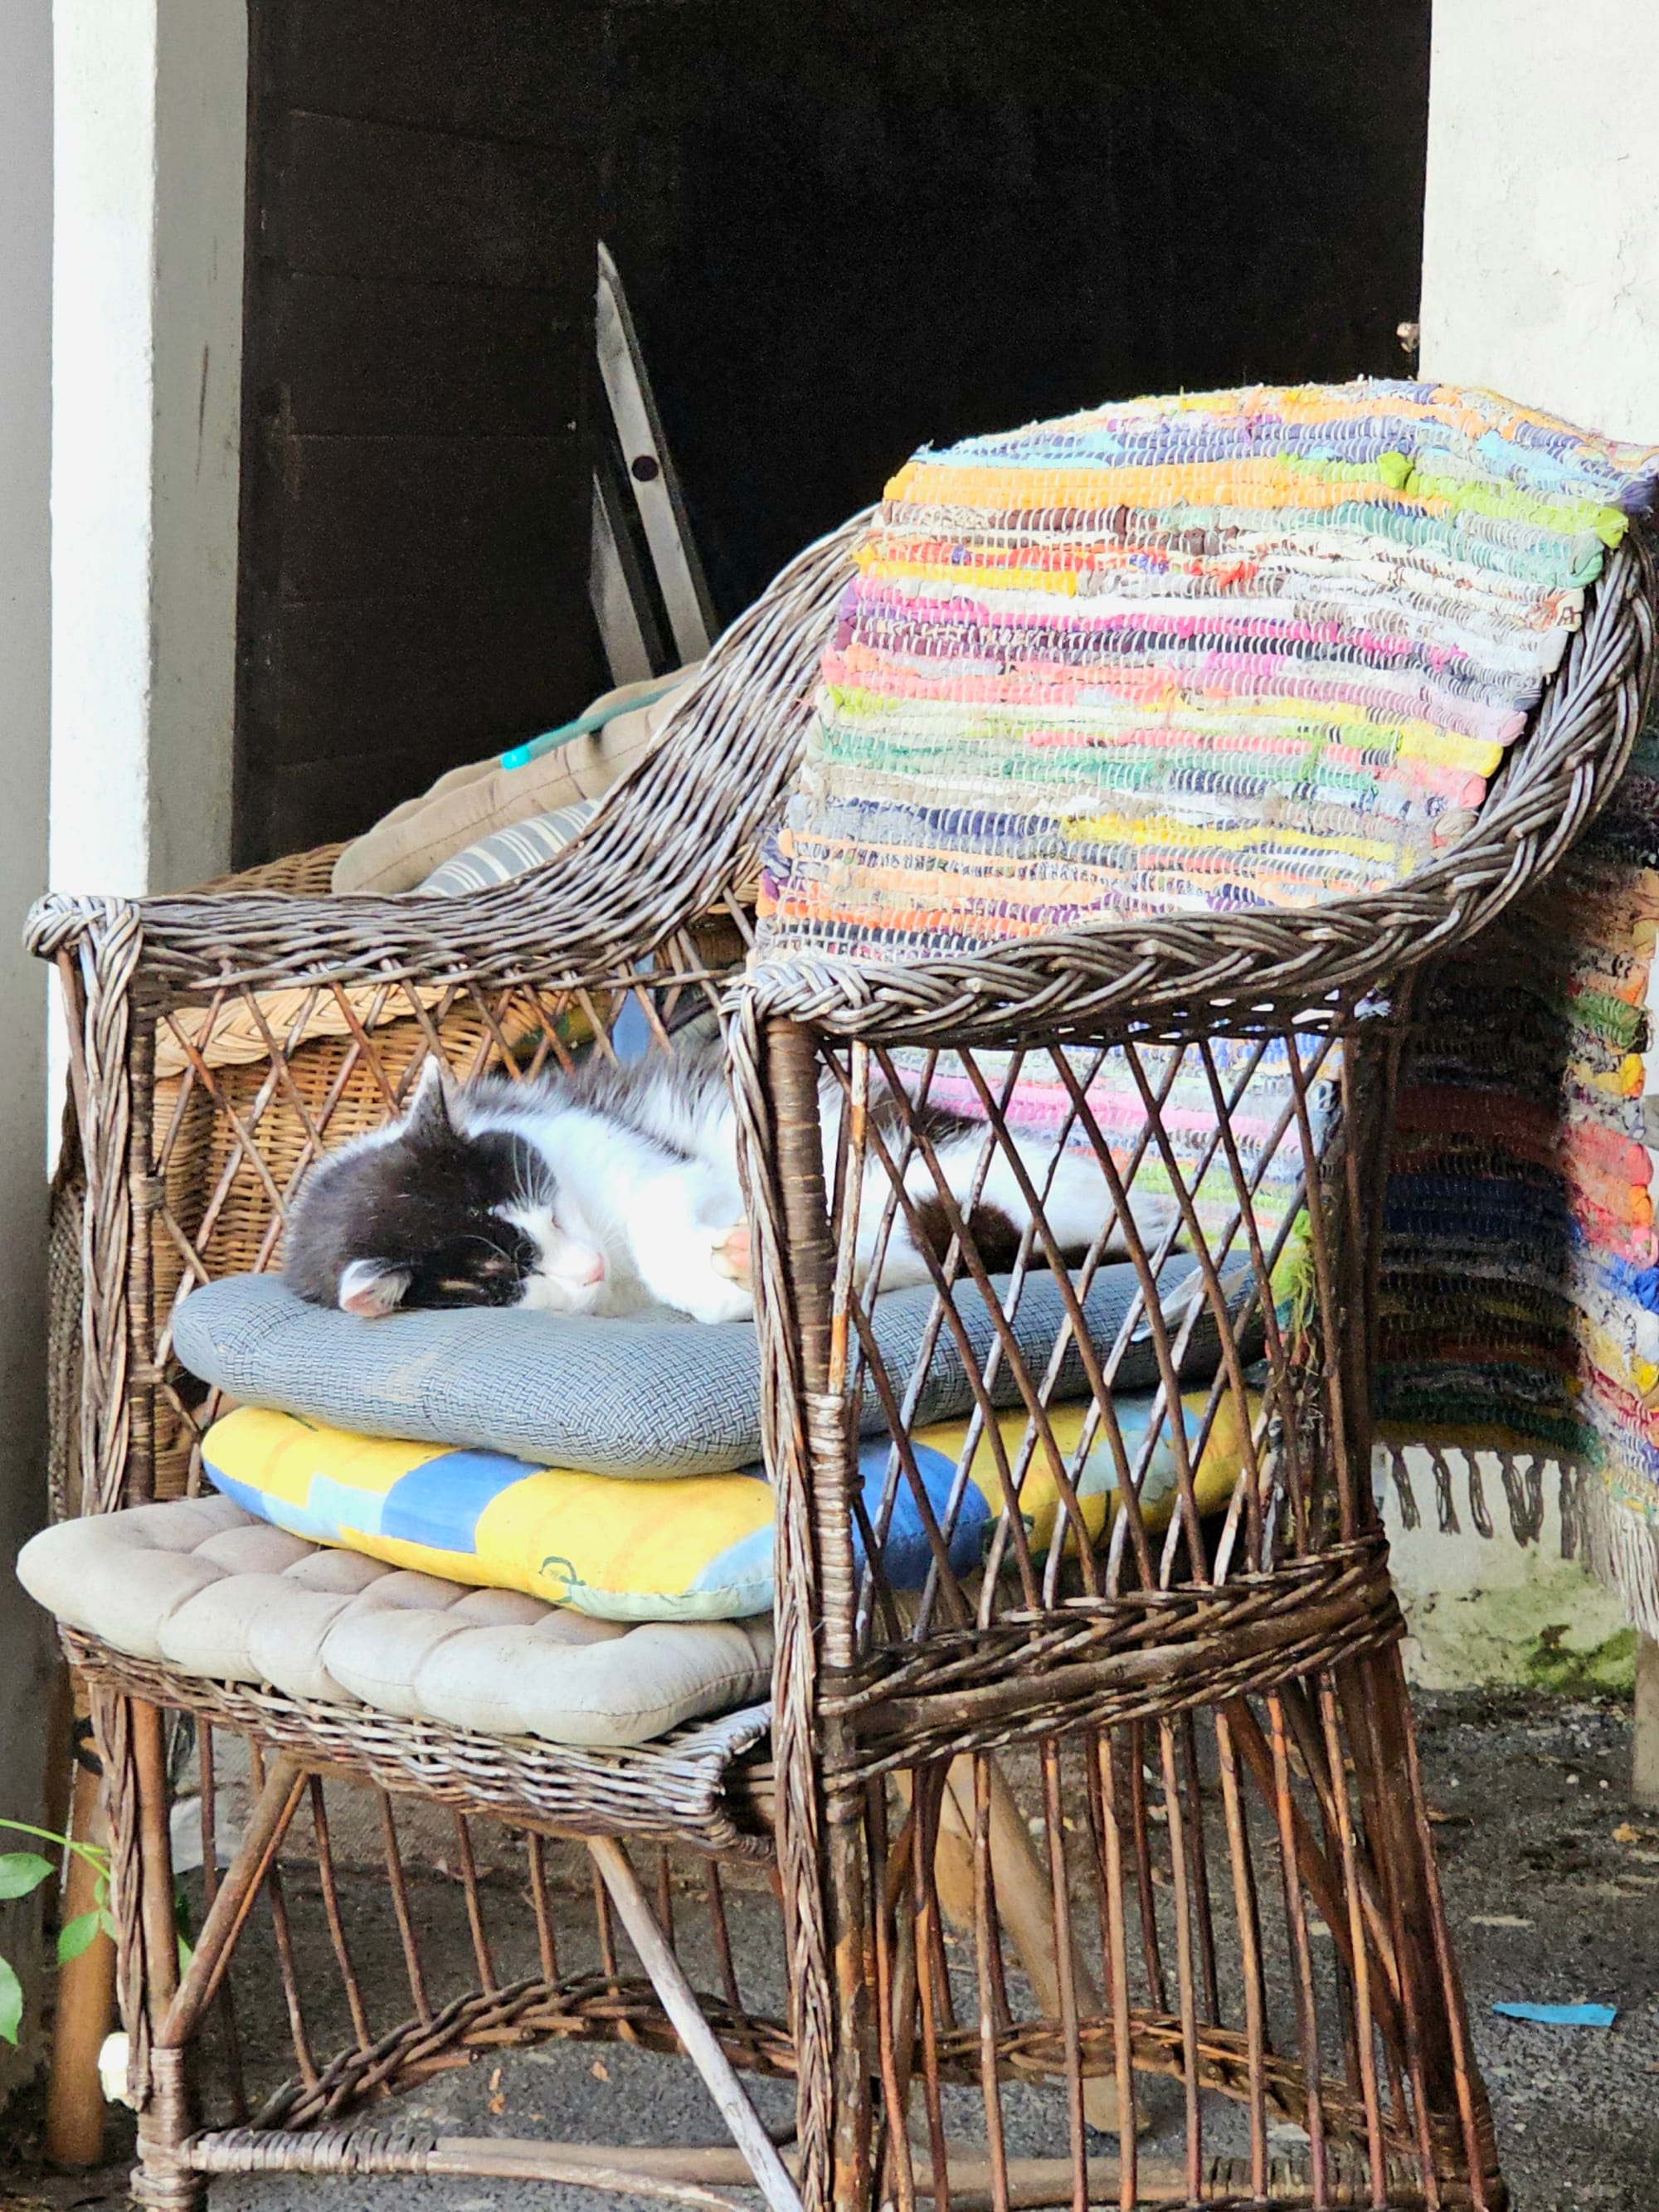 A black and white cat on a few pillows on a wicker chair. The cat is napping. 